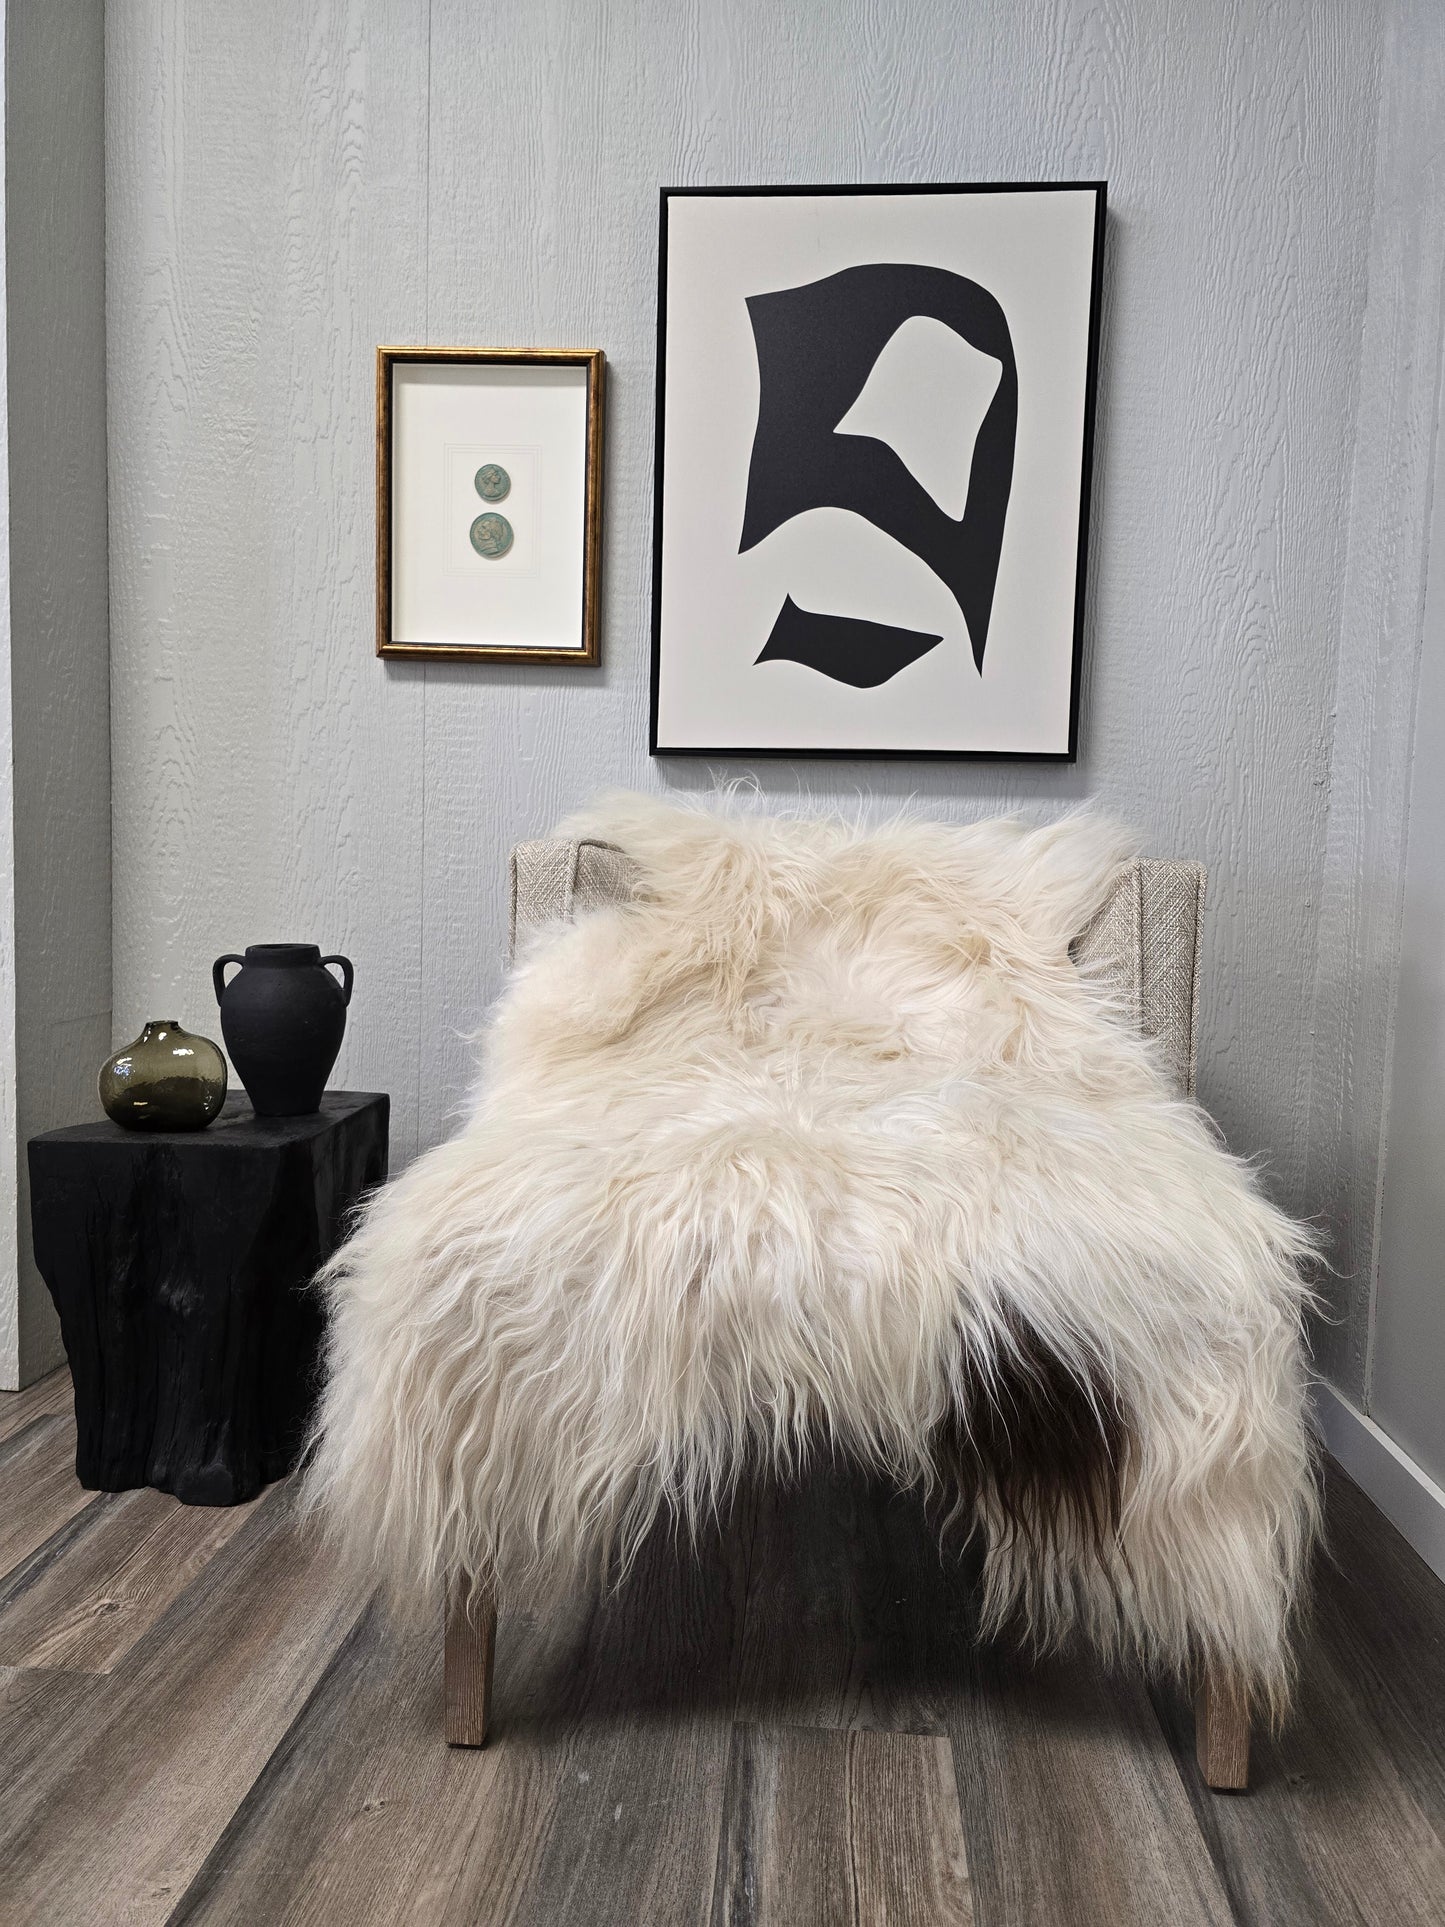 ONE OF THE KIND Icelandic White with Brown Spot Sheepskin